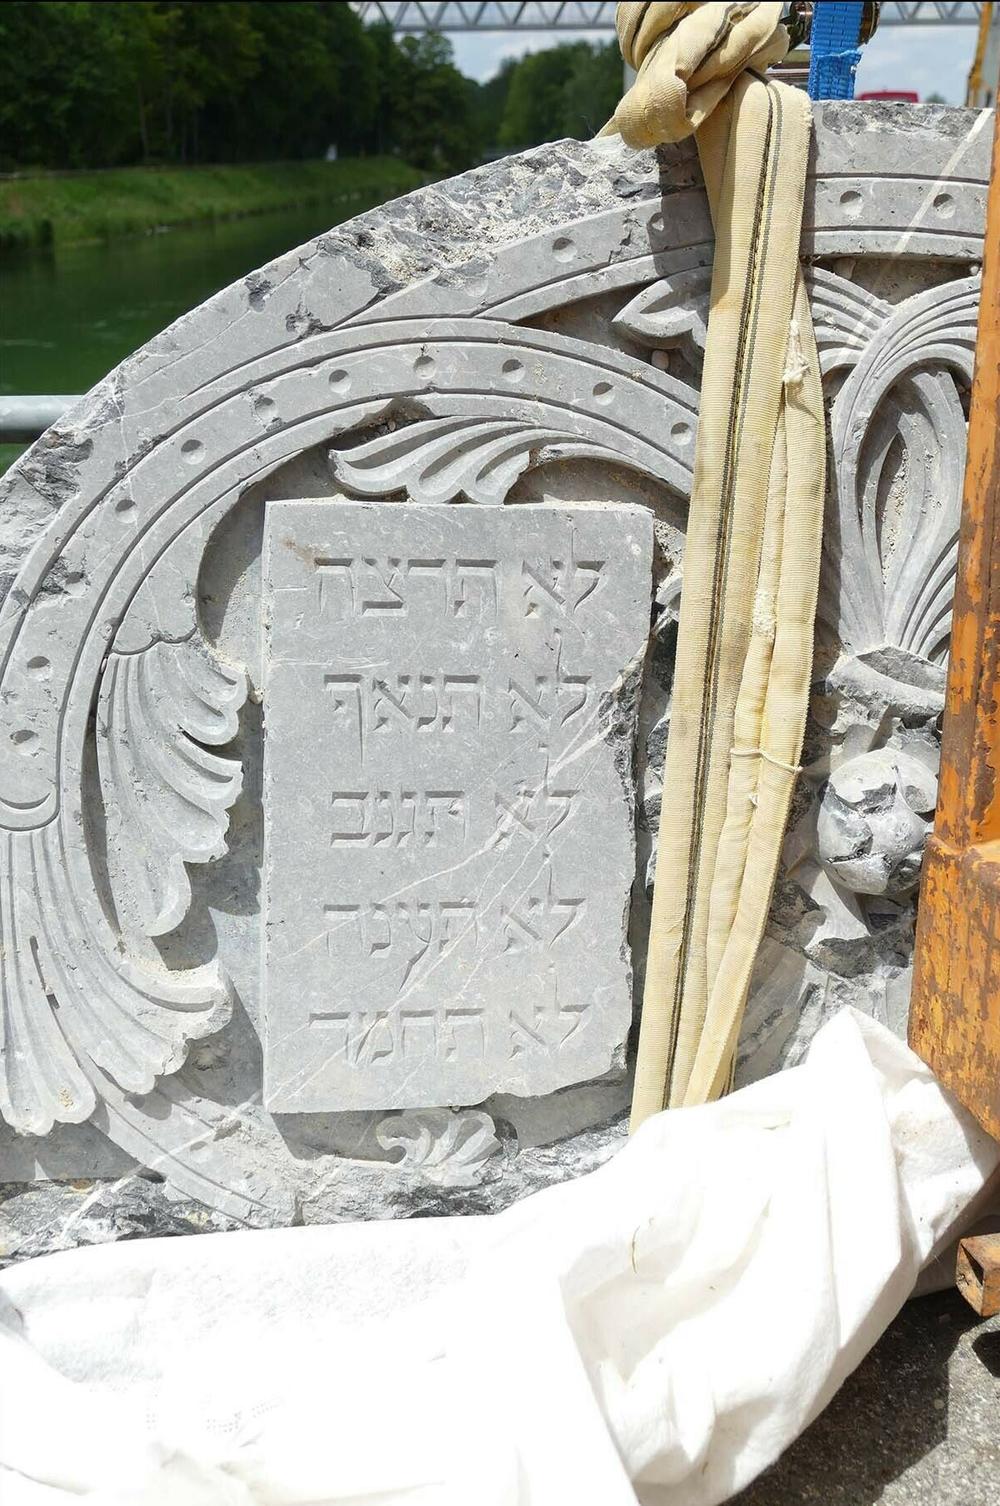 Fragments of the synagogue's marble Torah shrine at the discovery site of the rubble in the Isar river in Munich.